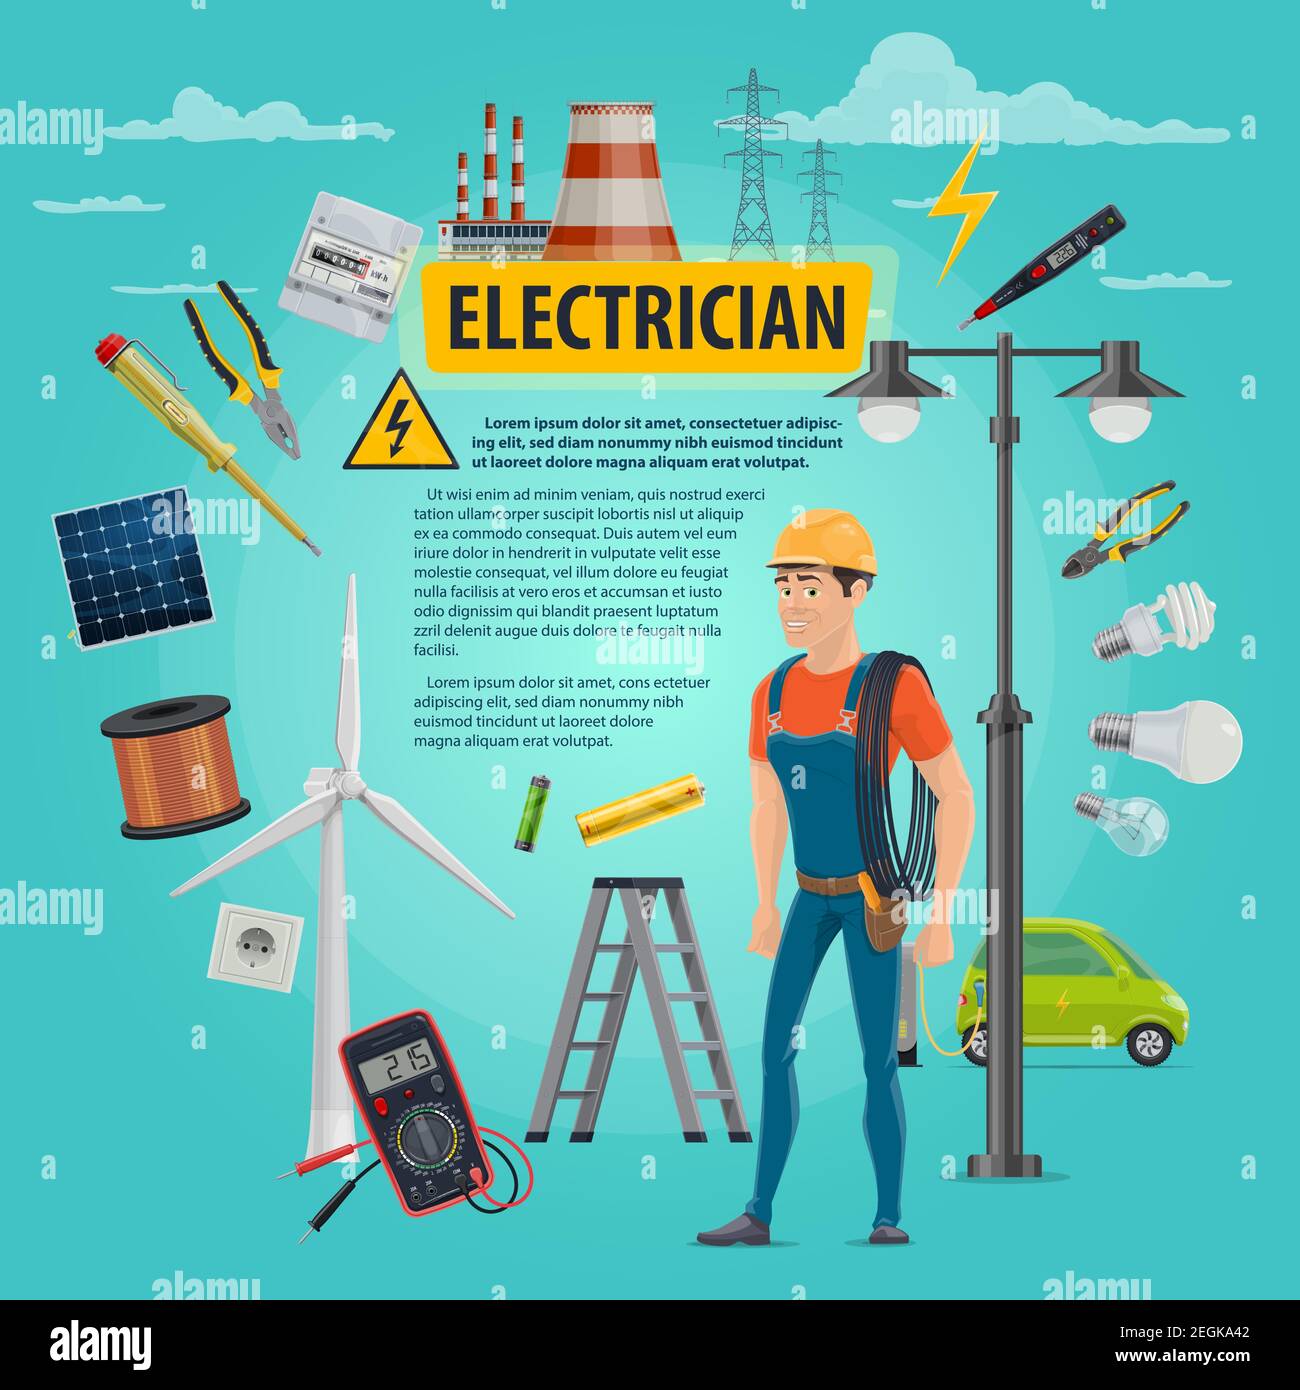 Electrician man and electricity repair work tools poster. Vector electrician profession and power repair equipment of electricity socket, electrical w Stock Vector